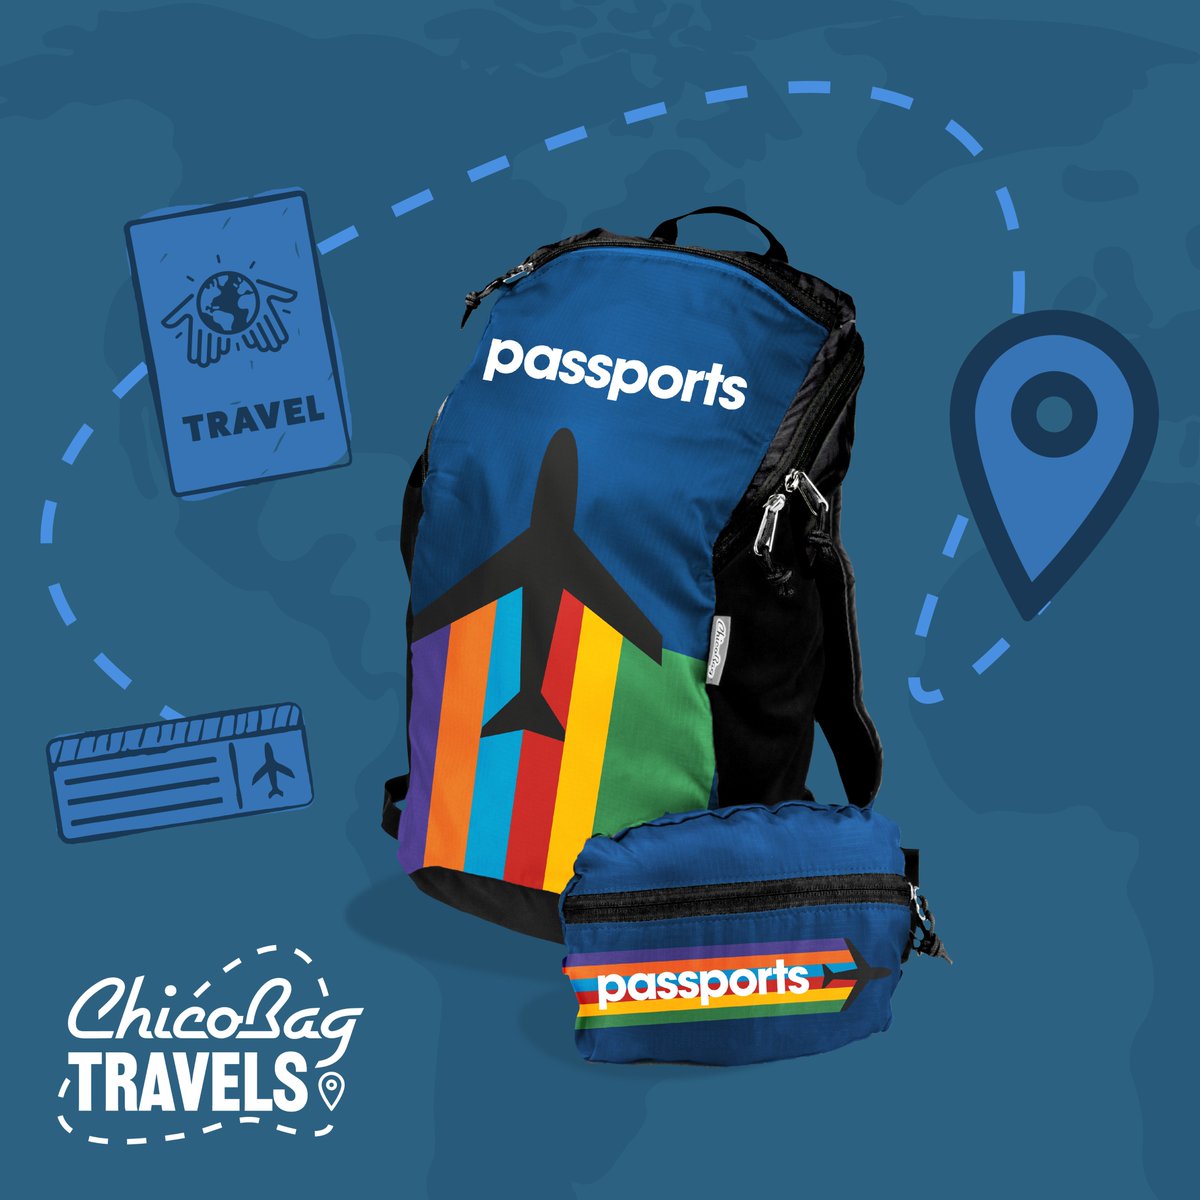 Meet @passportstravel! We love this educational travel tour company with a passion for protecting planet Earth. They recently customized packable, lightweight, hydration-ready Travel Packs for their adventurers! Read more: tinyurl.com/3pahdw68 #chicobag #education